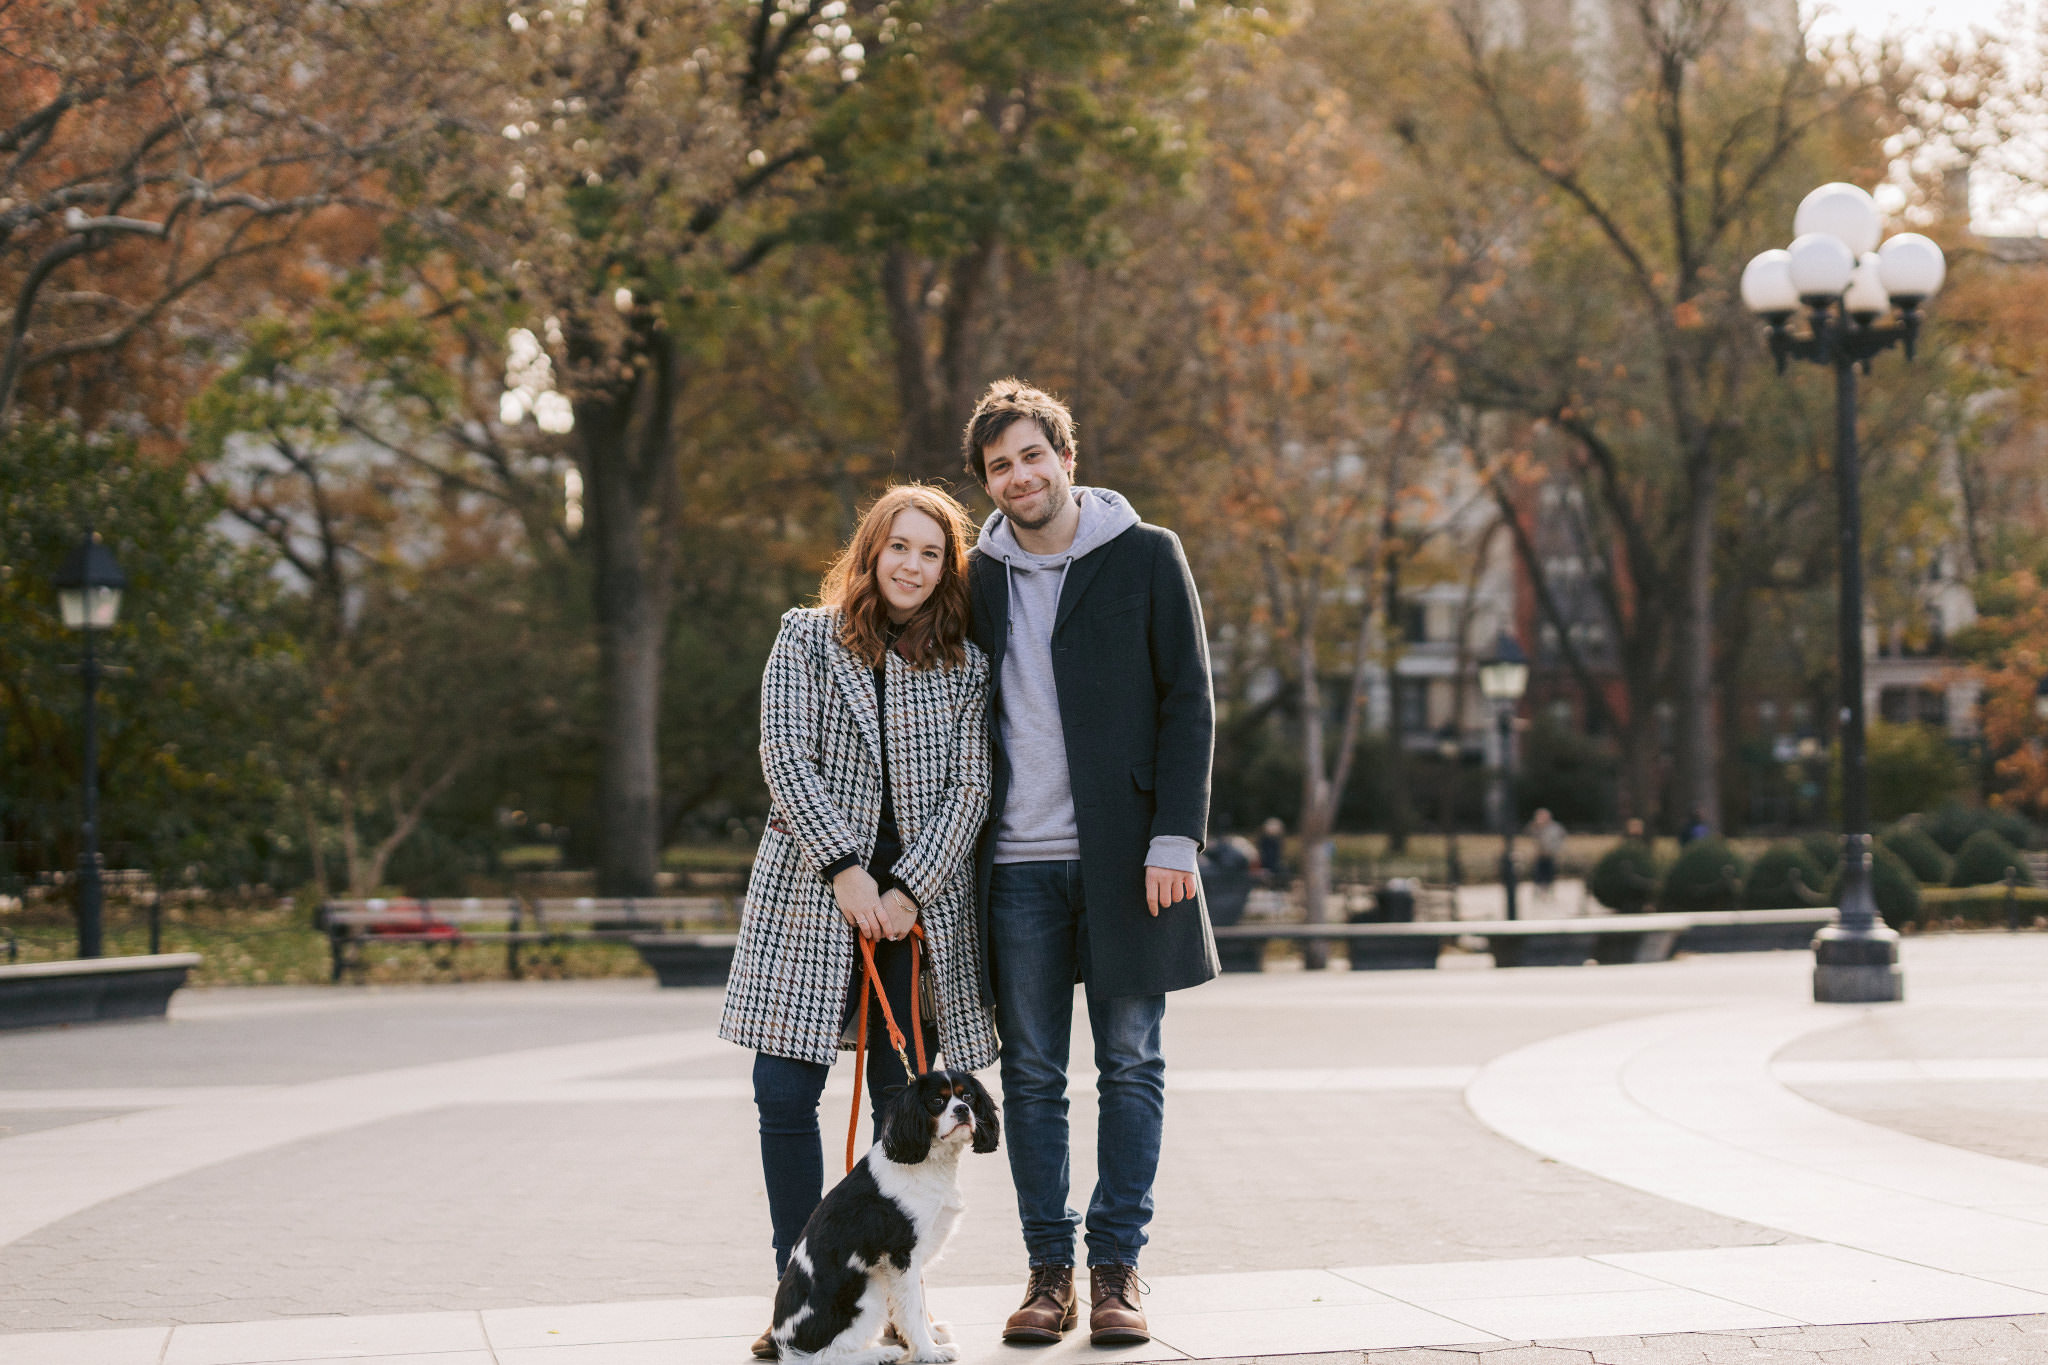 Editorial photo of the engaged couple with their pet at the park. Engagement session with pets photo by Jenny Fu Studio.